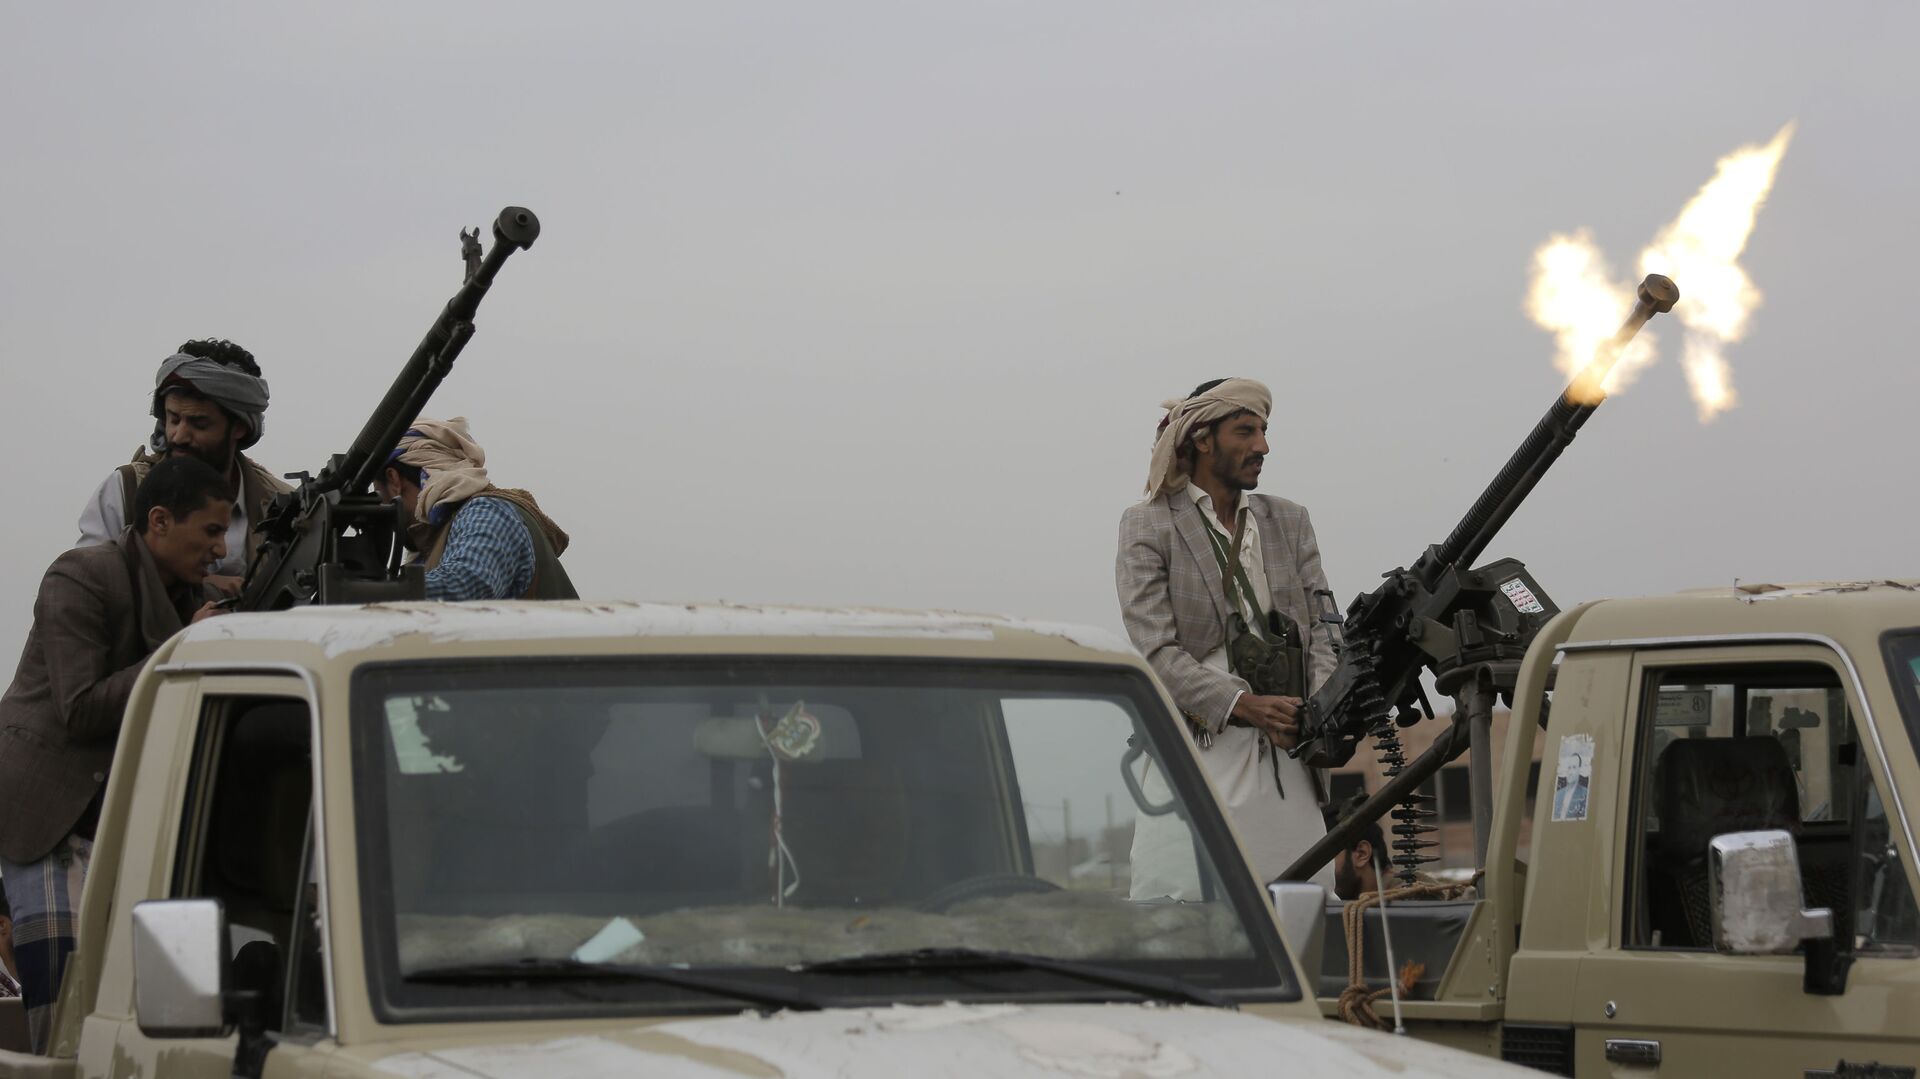 A Houthi rebel fighter fires in the air during a gathering aimed at mobilizing more fighters for the Houthi movement, in Sanaa, Yemen - Sputnik International, 1920, 16.02.2021